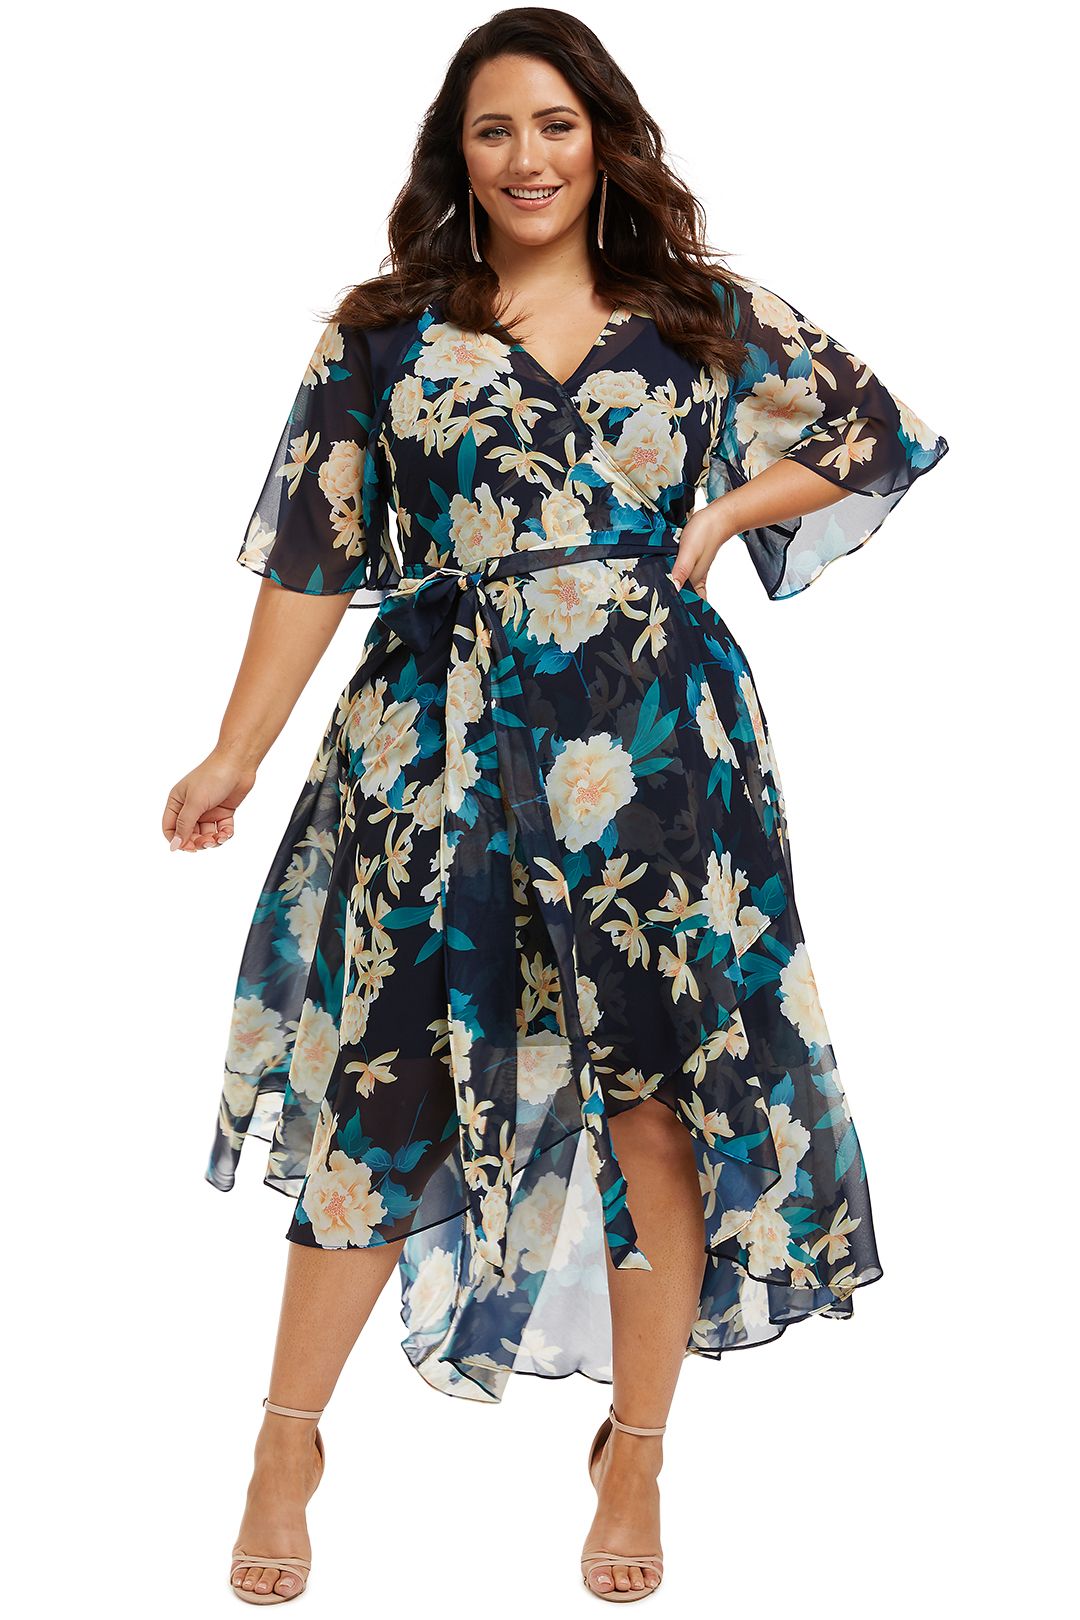 Shibuya Floral Maxi Dress in Navy by City Chic for Hire